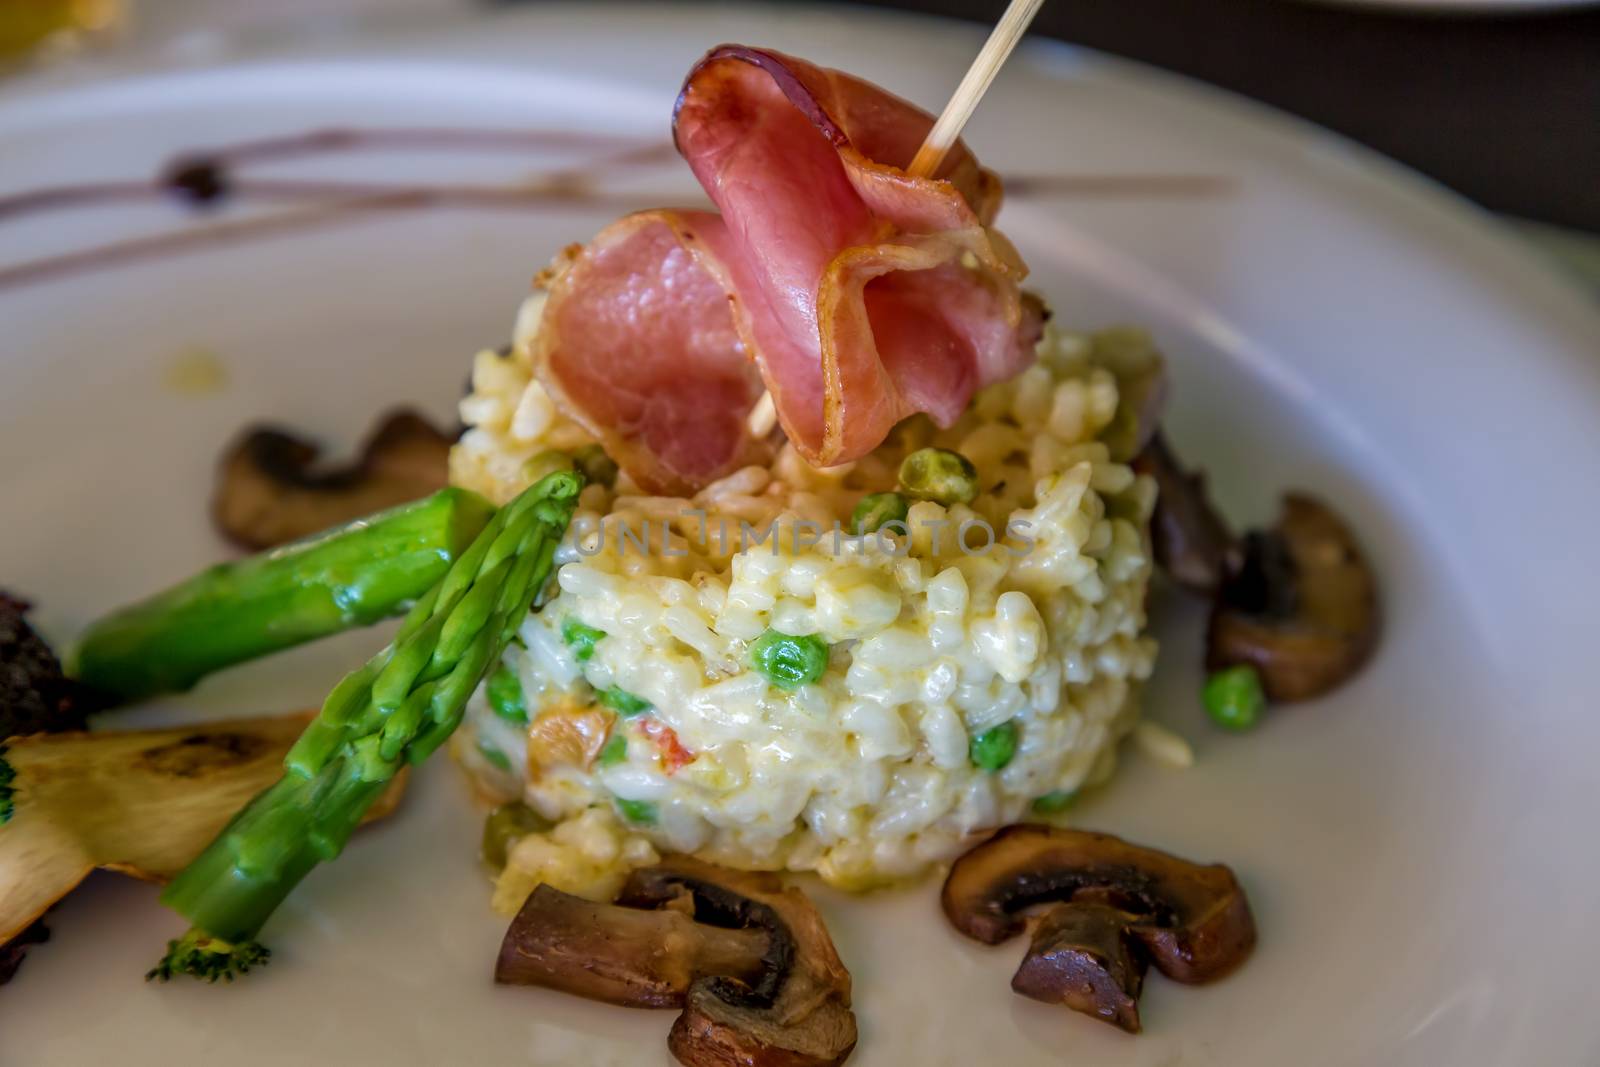 Risotto with mushrooms, fresh herbs and parmesan ham. by Digoarpi